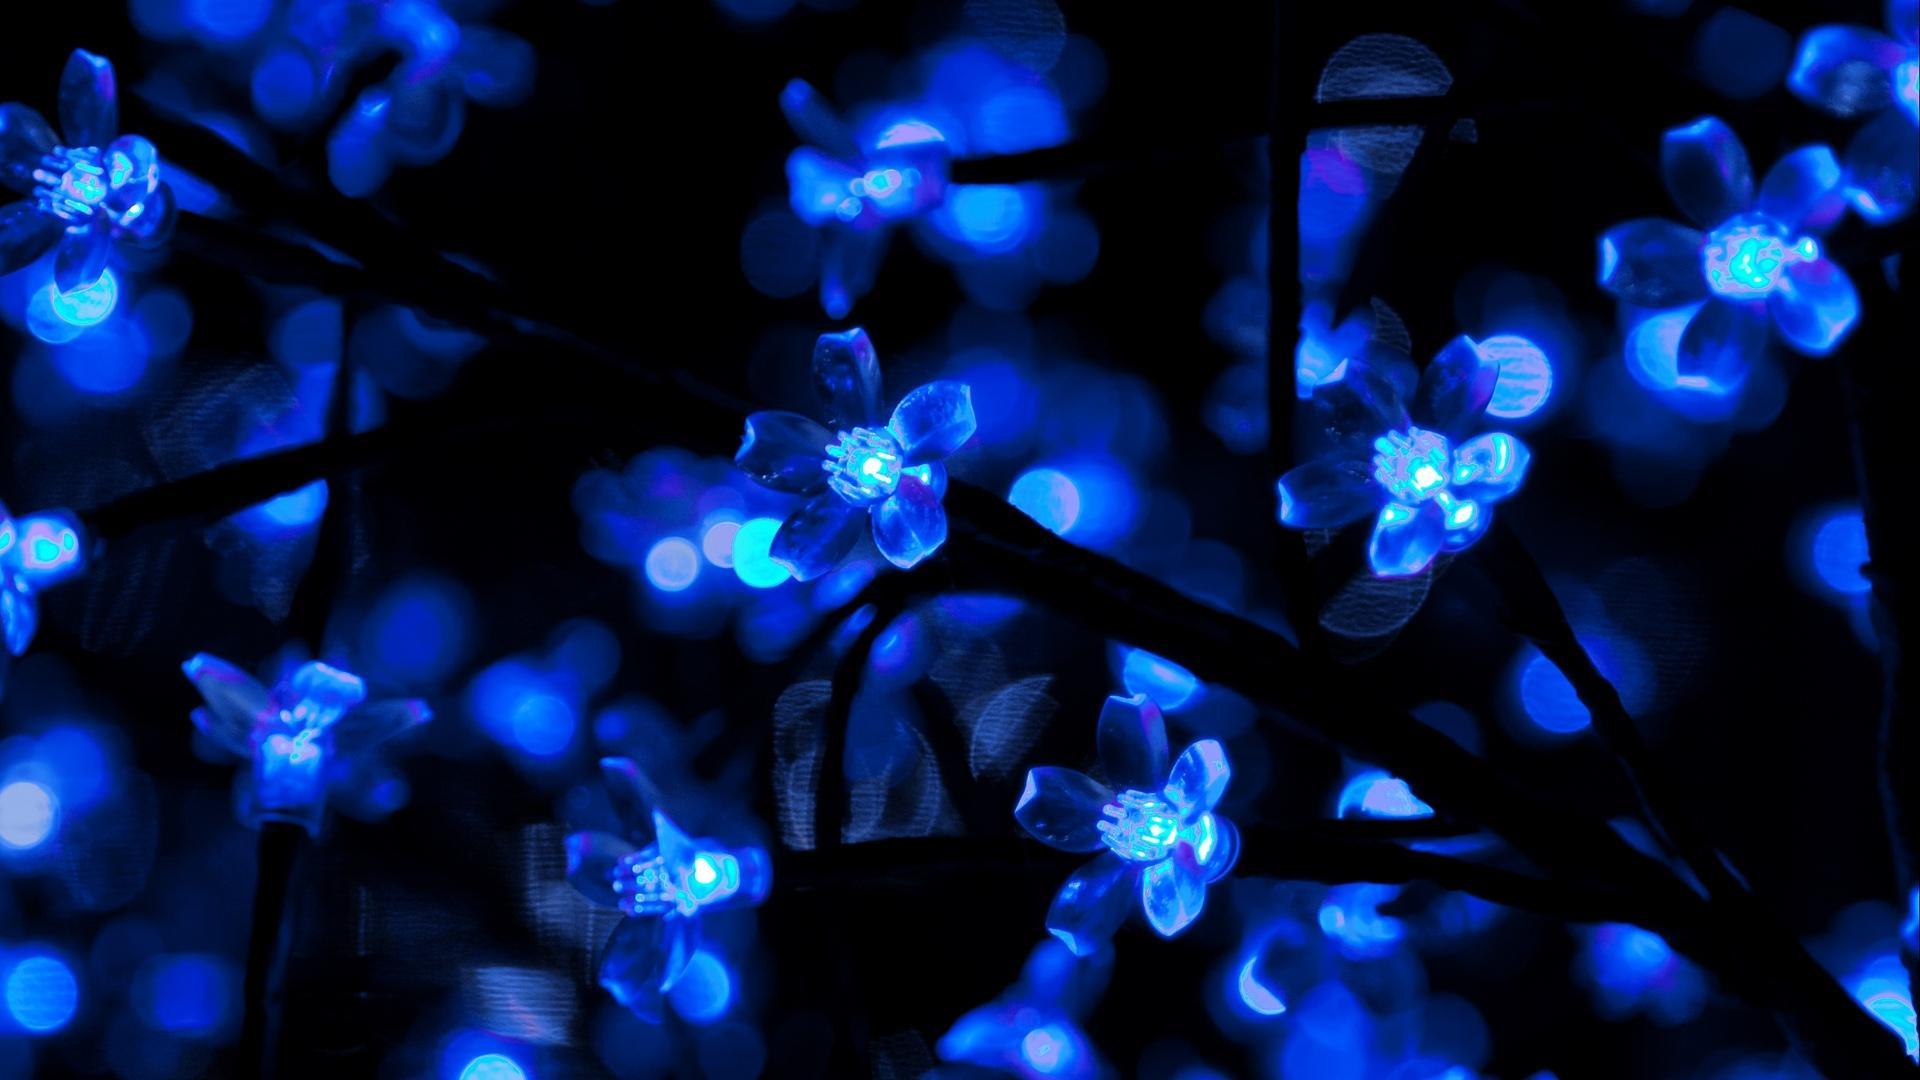 Neon Flower Live Wallpaper Backgrounds Hd For Android Apk Download - neon blue aesthetic wallpaper roblox